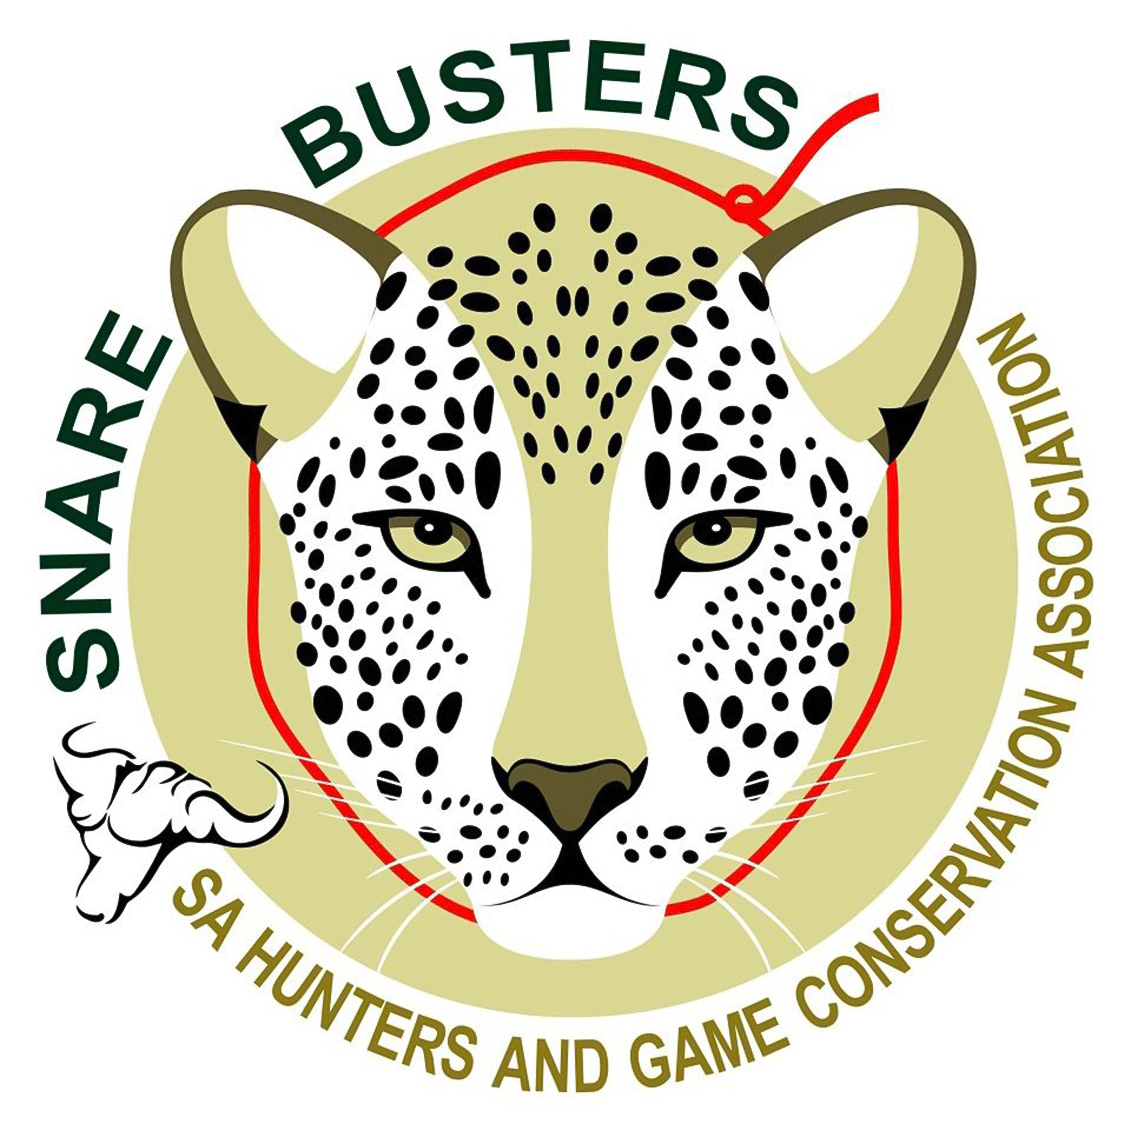 Snare Busters - Snare Sweep Report